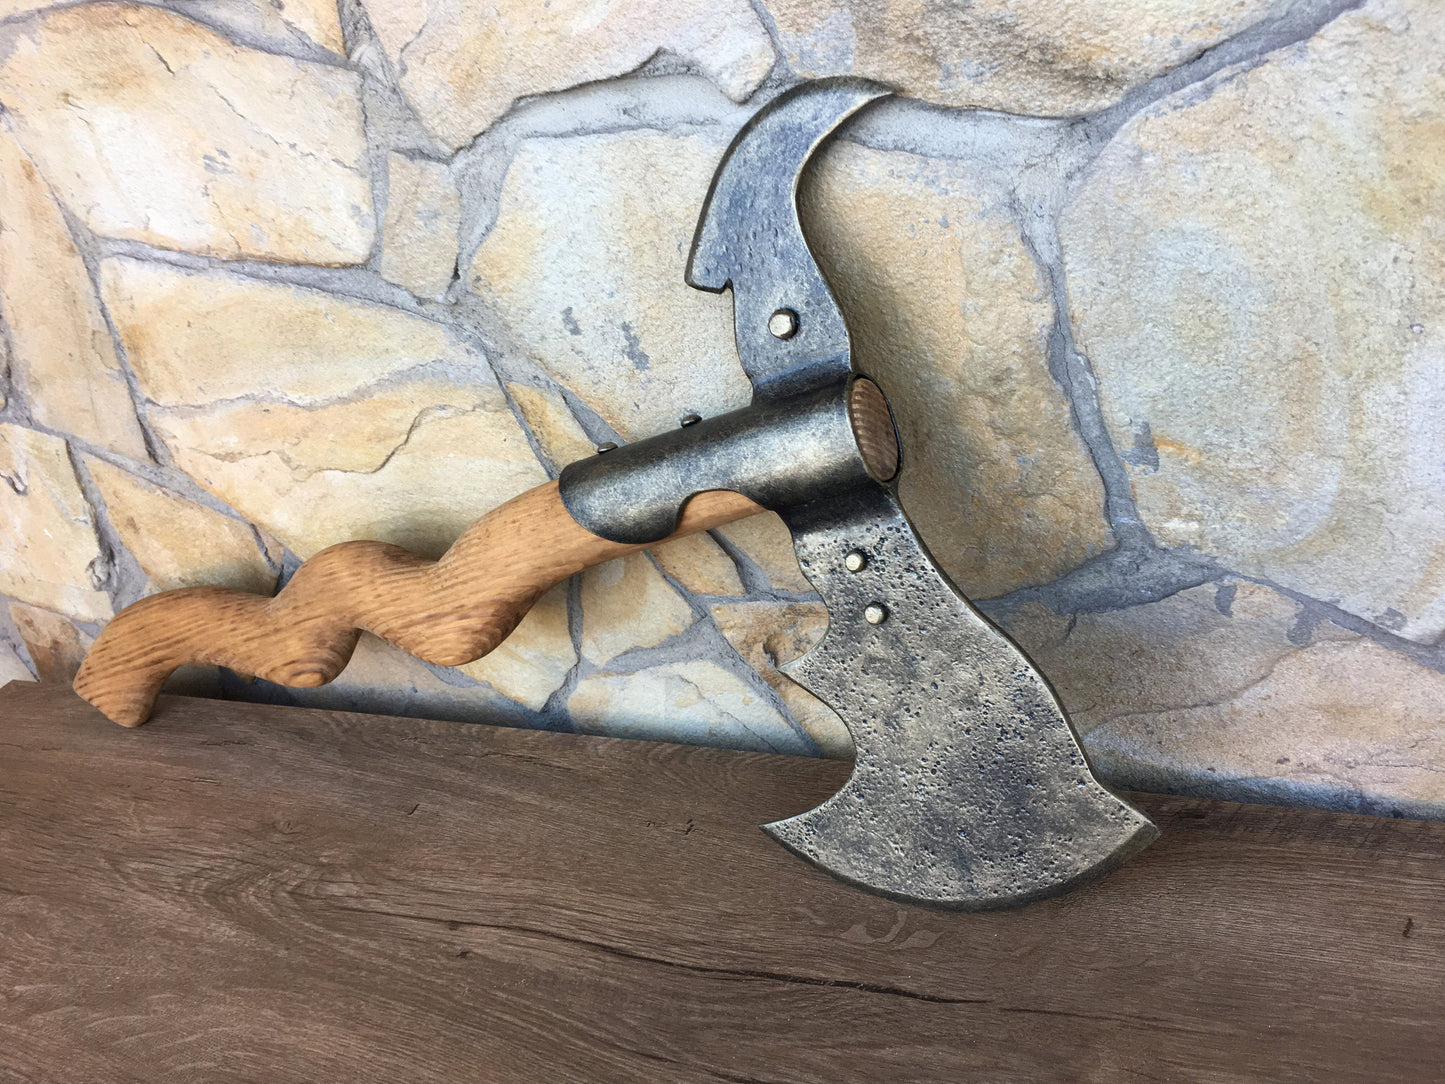 Decorative axe, viking axe, hand forged axe, tomahawk, hatchet, mens gifts, medieval axe, axe gift, viking style gift, viking gifts, ax